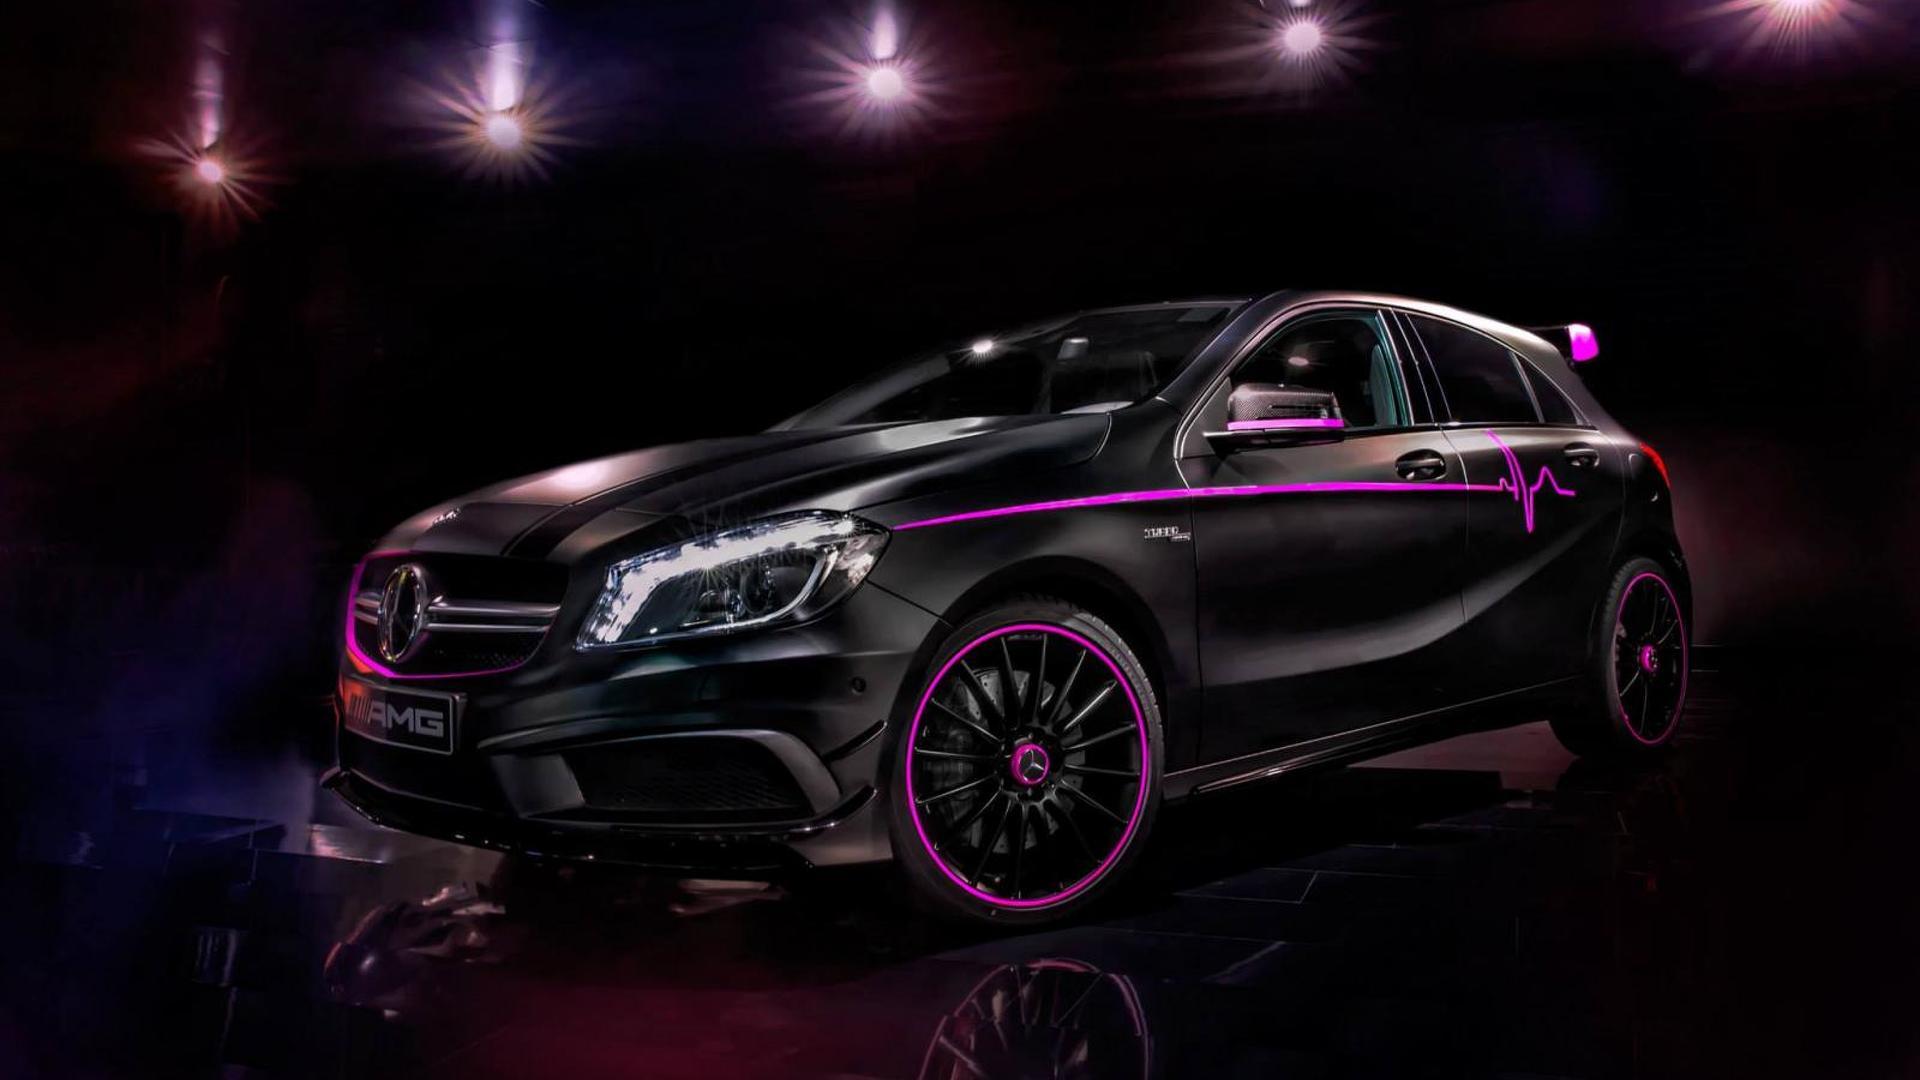 Mercedes A 45 AMG gets a pink makeover by the AMG Performance Studio